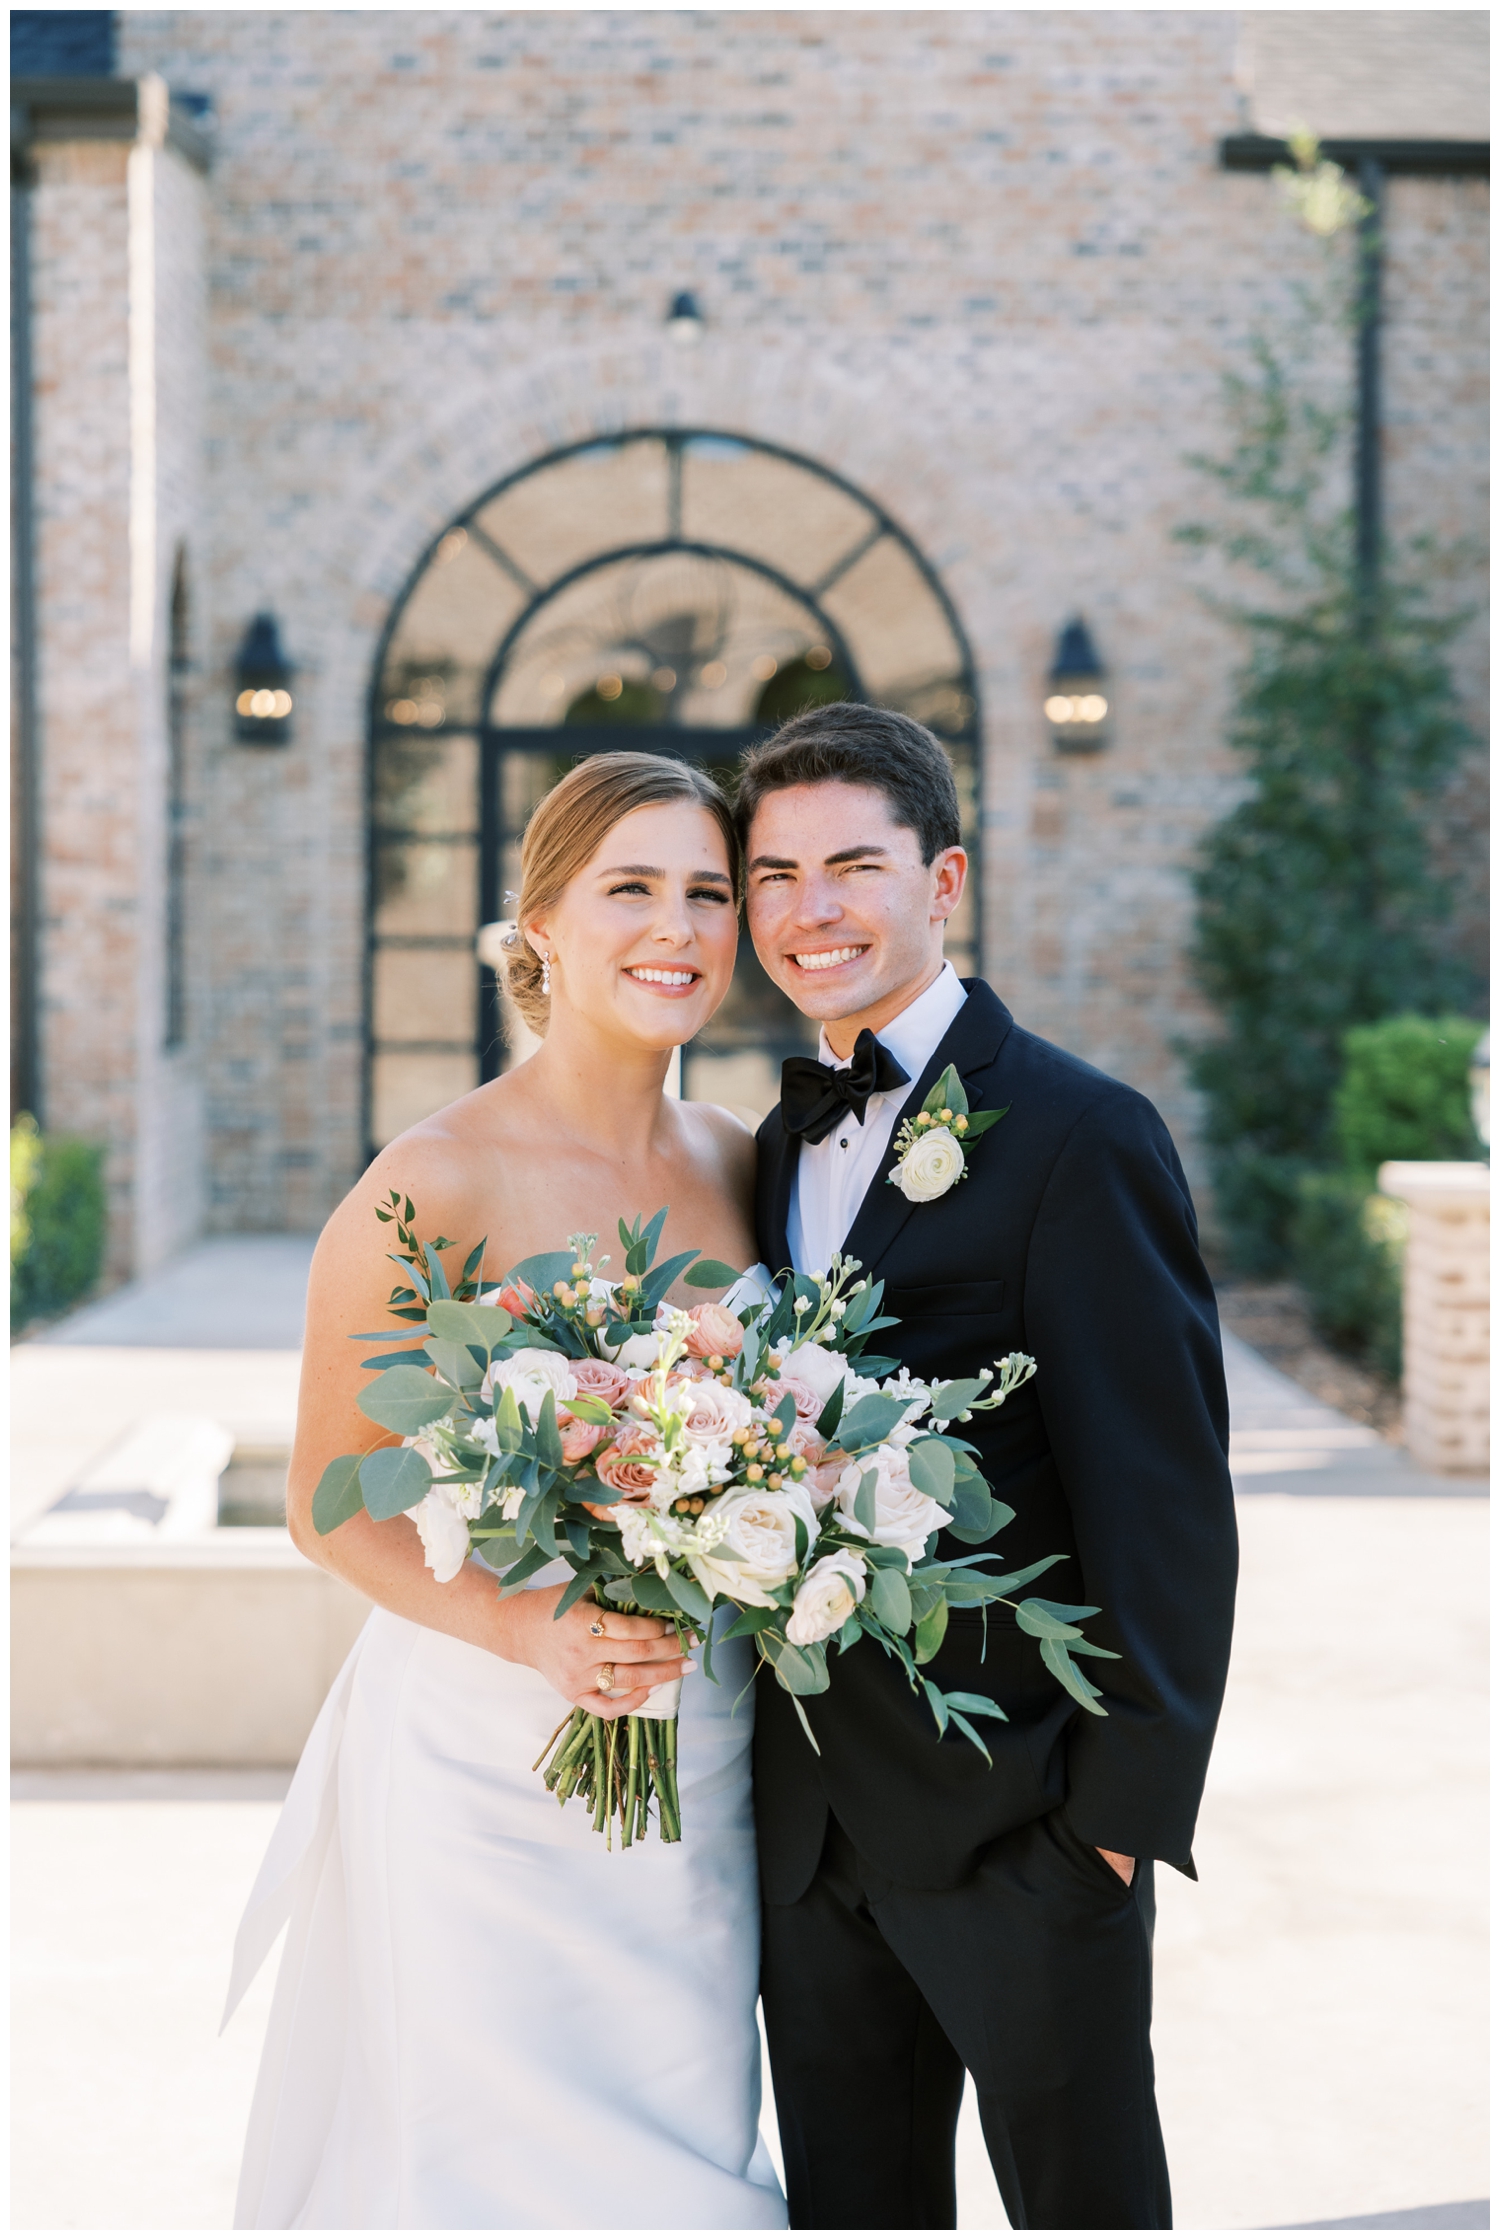 elegant Iron Manor Wedding portrait of bride and groom cheek to cheek outdoors with colorful bouquet